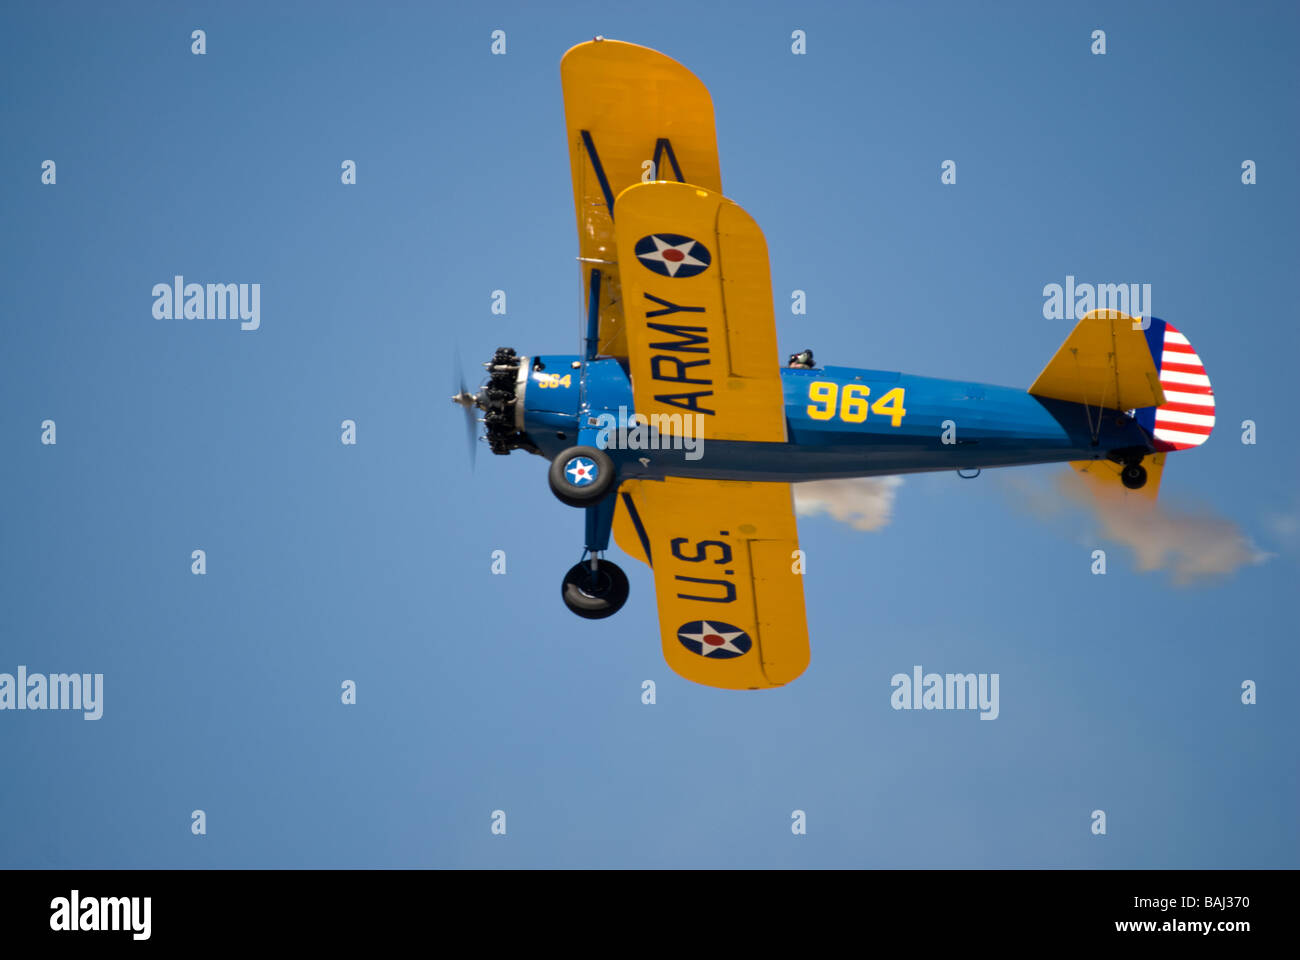 A US Army version of the Stearman biplane - in flight and seen from an underneath angle Stock Photo